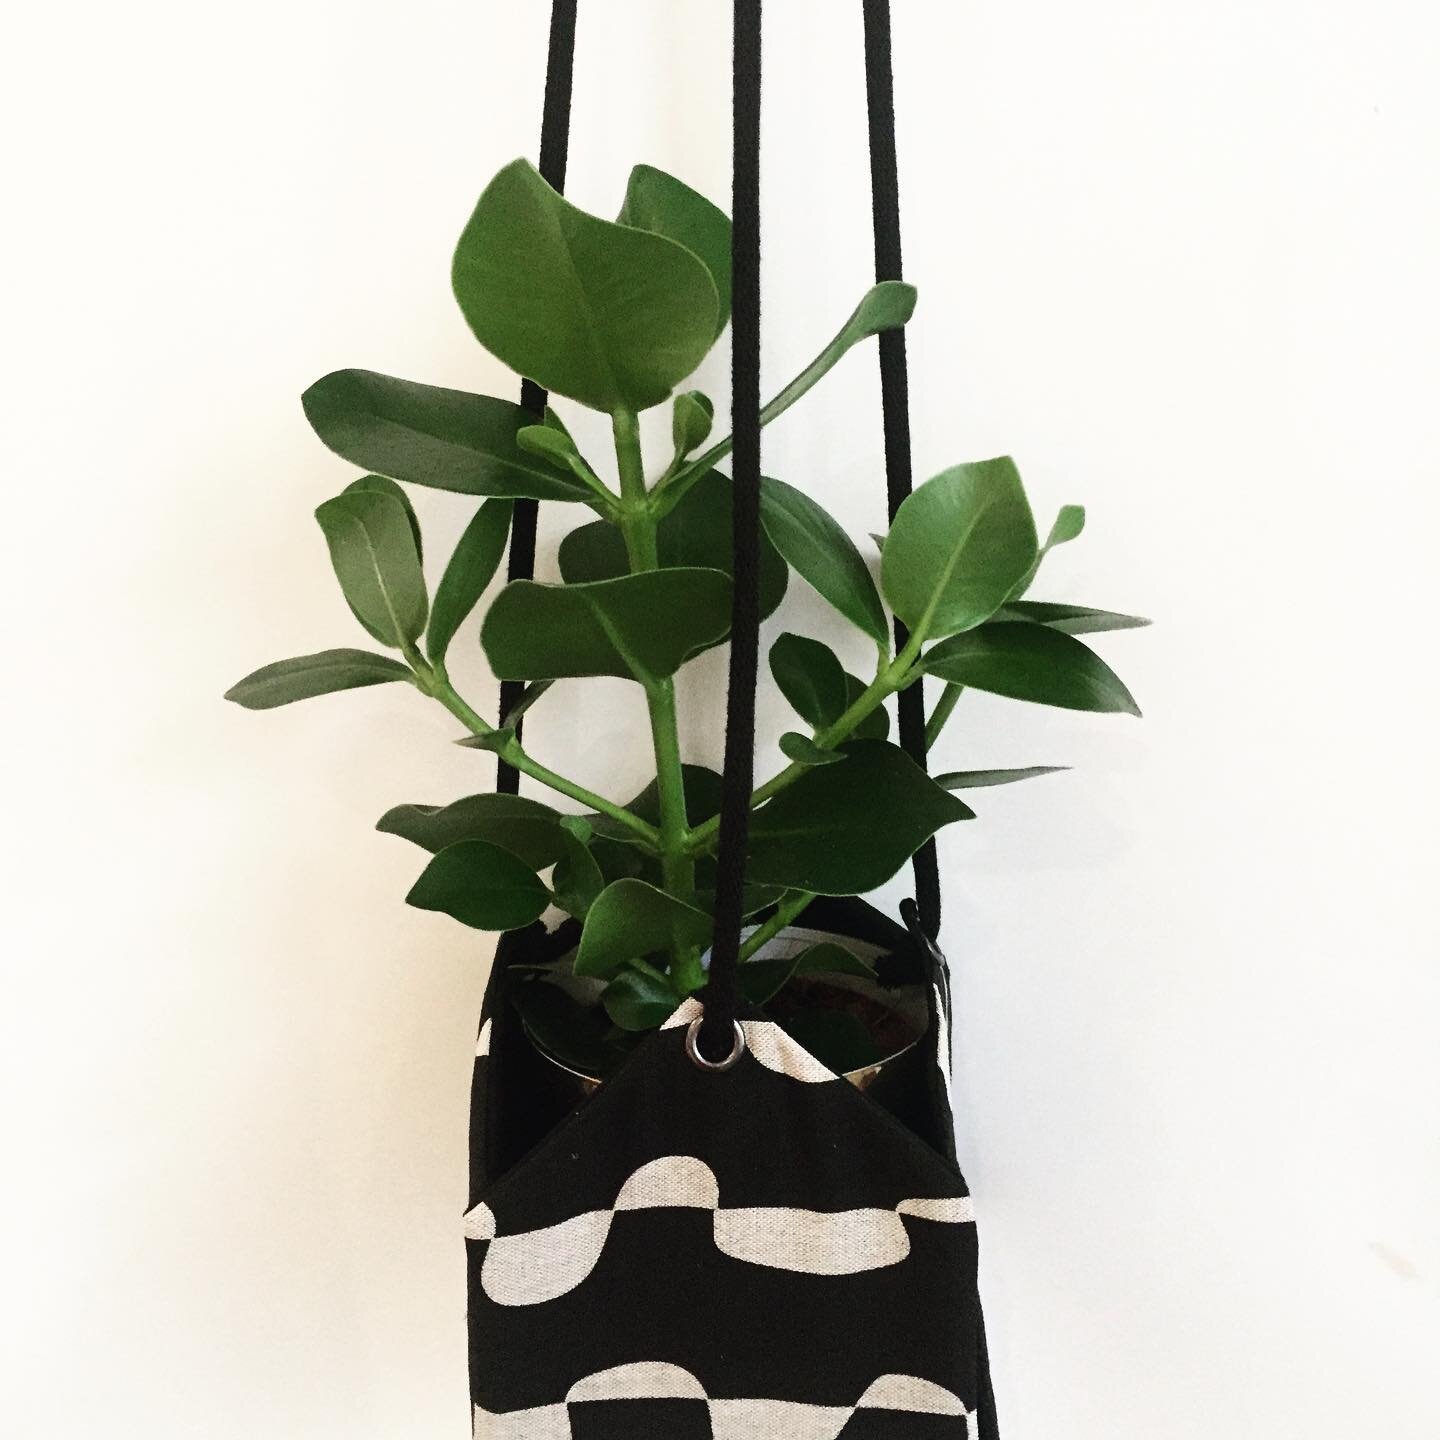 Thought we could all do with a bit of weekend plant action. My wave plant hanger is handmade by me using my own printed cotton linen....if you&rsquo;re looking for a gift to send this Mother&rsquo;s Day they come gift wrapped and are perfect for post